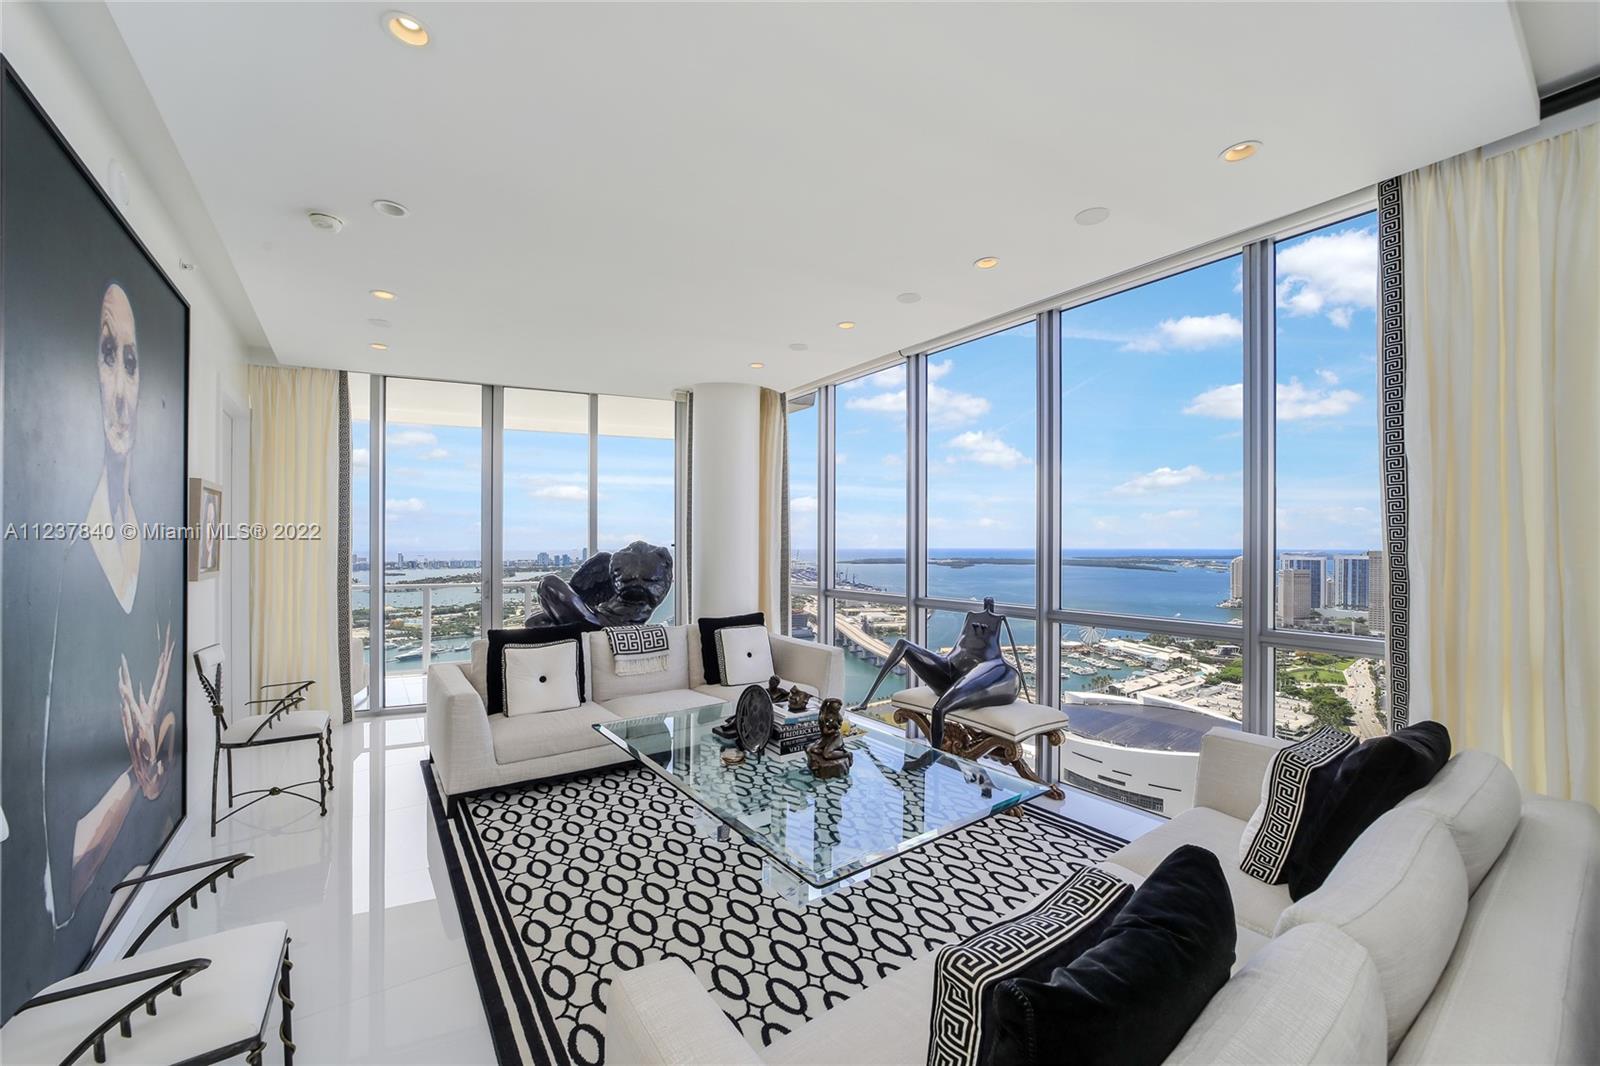 Most desired line in the Building.  This 50th Floor SE corner unit has breathtaking views of Miami Beach, the Bay, and Downtown Miami.  3 Bedroom converted to a 2 Bedroom plus den.  The Highest floor on this line for sale.  Directly in front of the Art and Science museum, and next to the future signature bridge of Miami. Video tour available to watch.